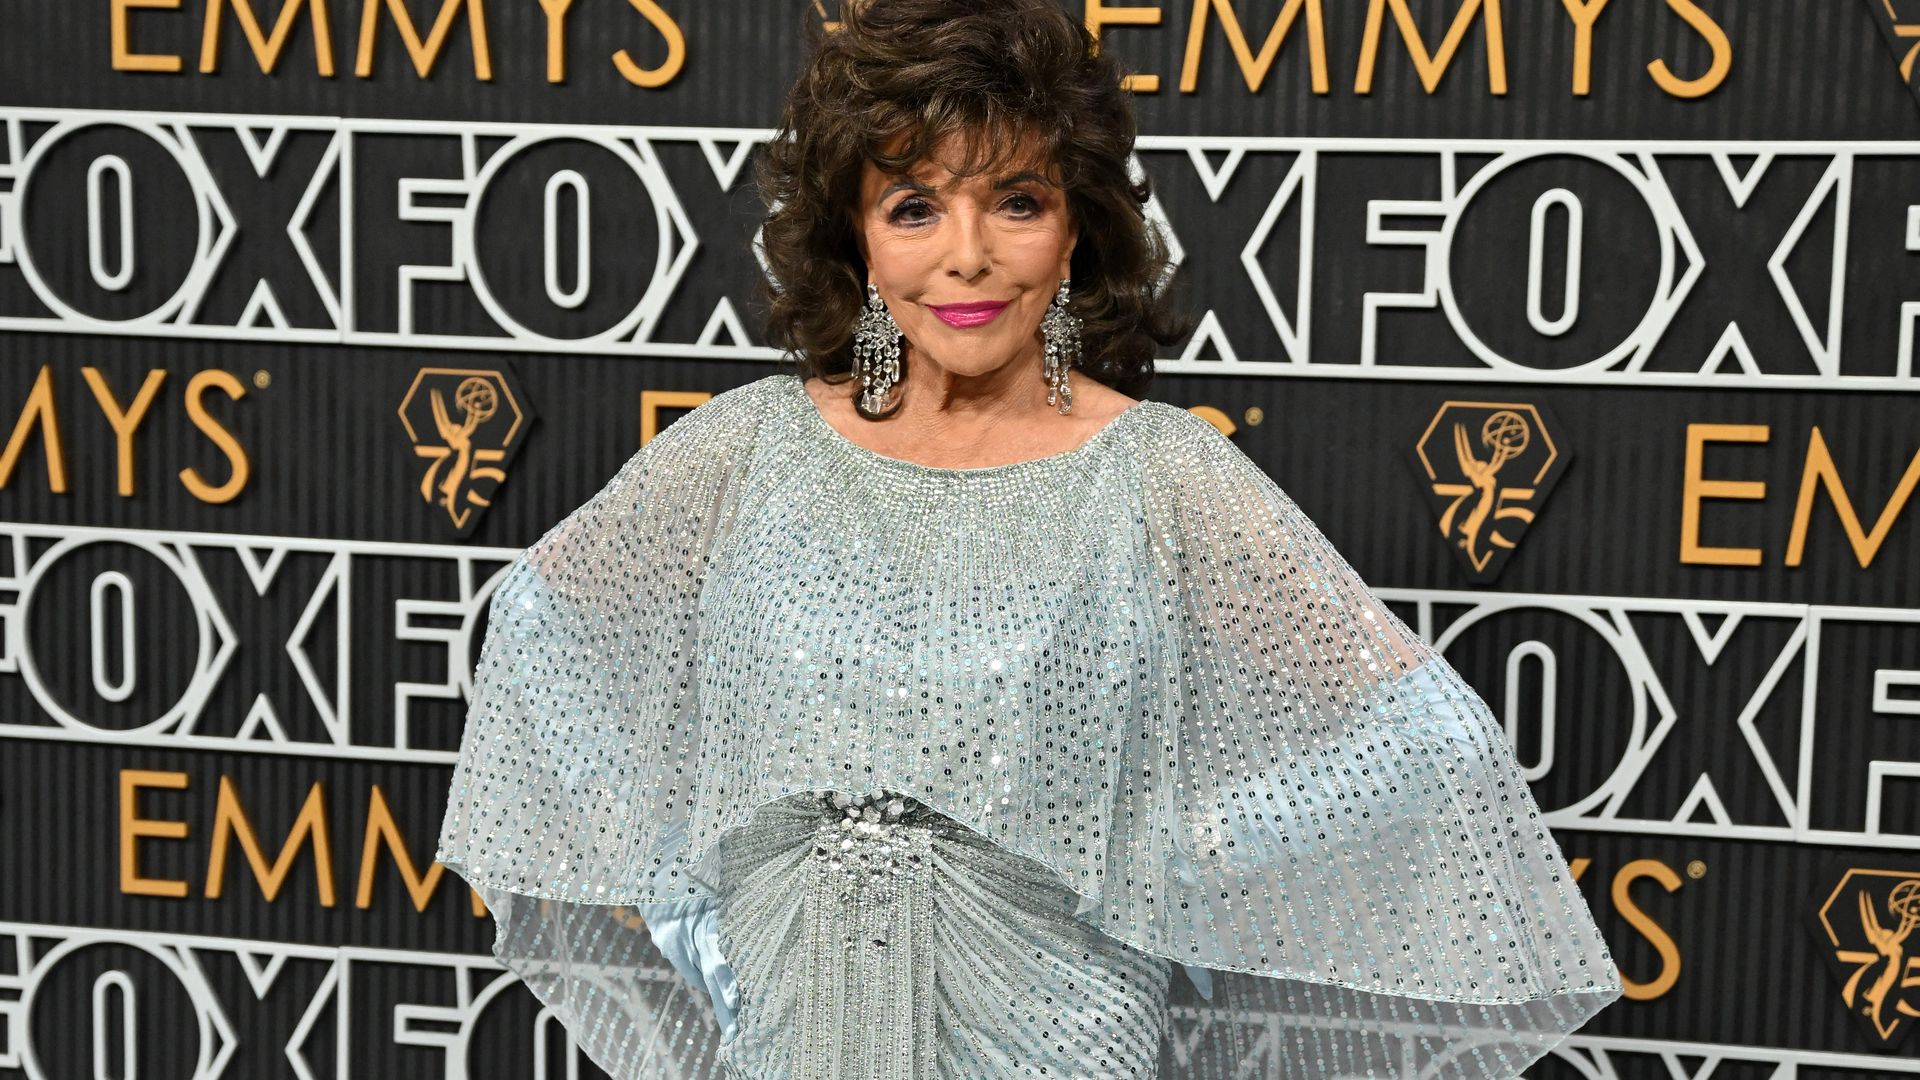 US actress Joan Collins looked incredible at Emmys